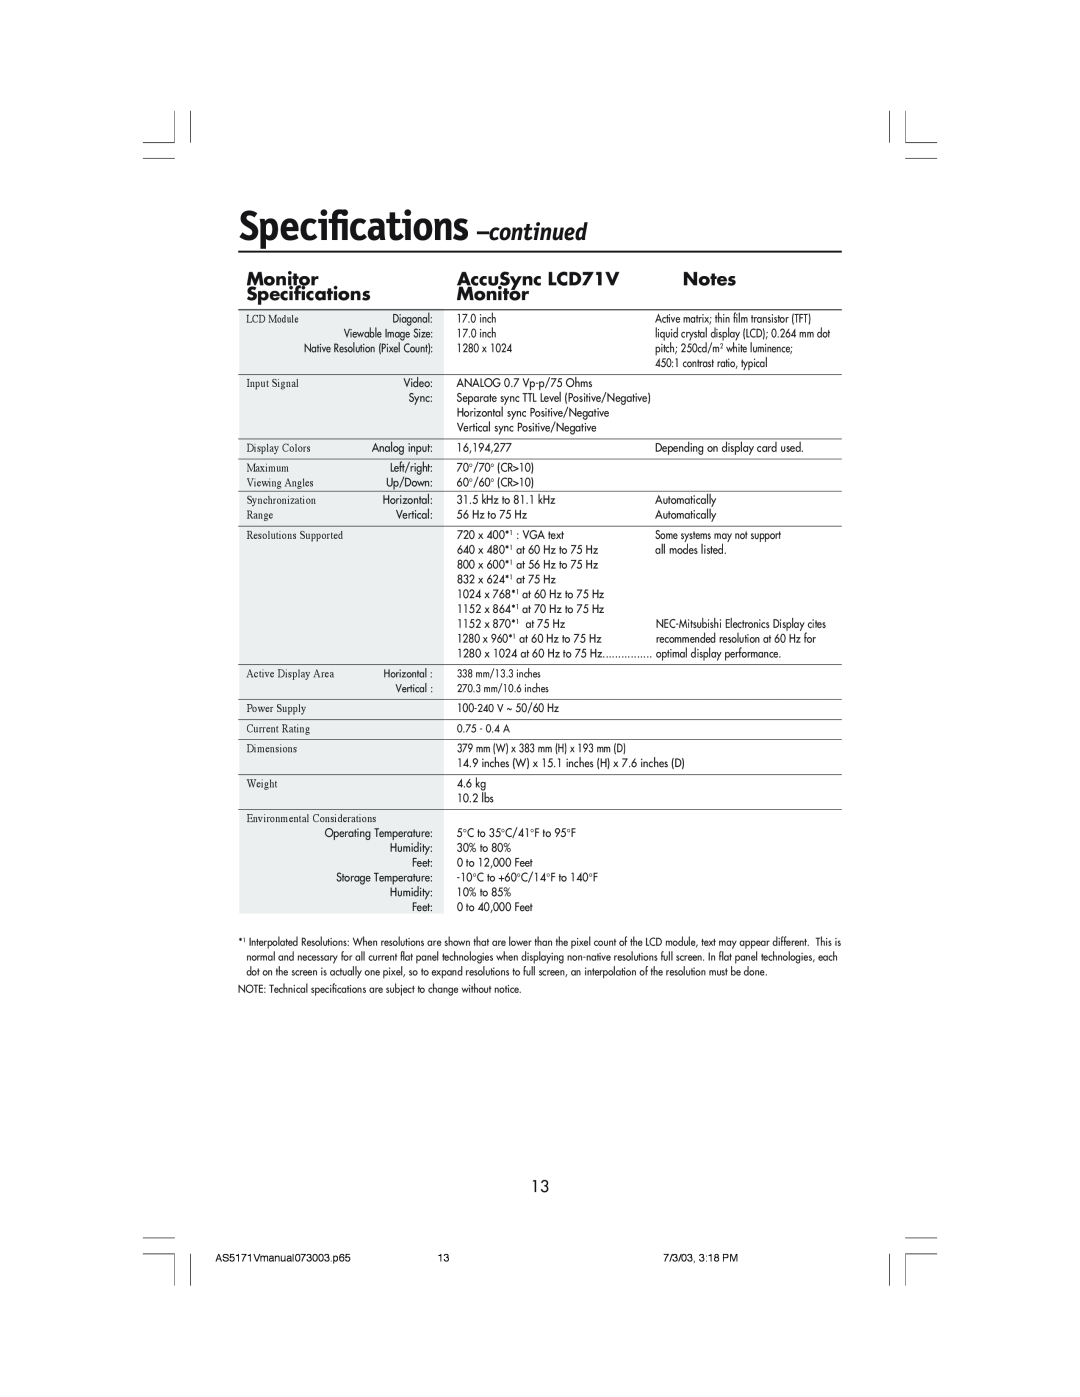 NEC manual Specifications -continued, AccuSync LCD71V, Monitor 